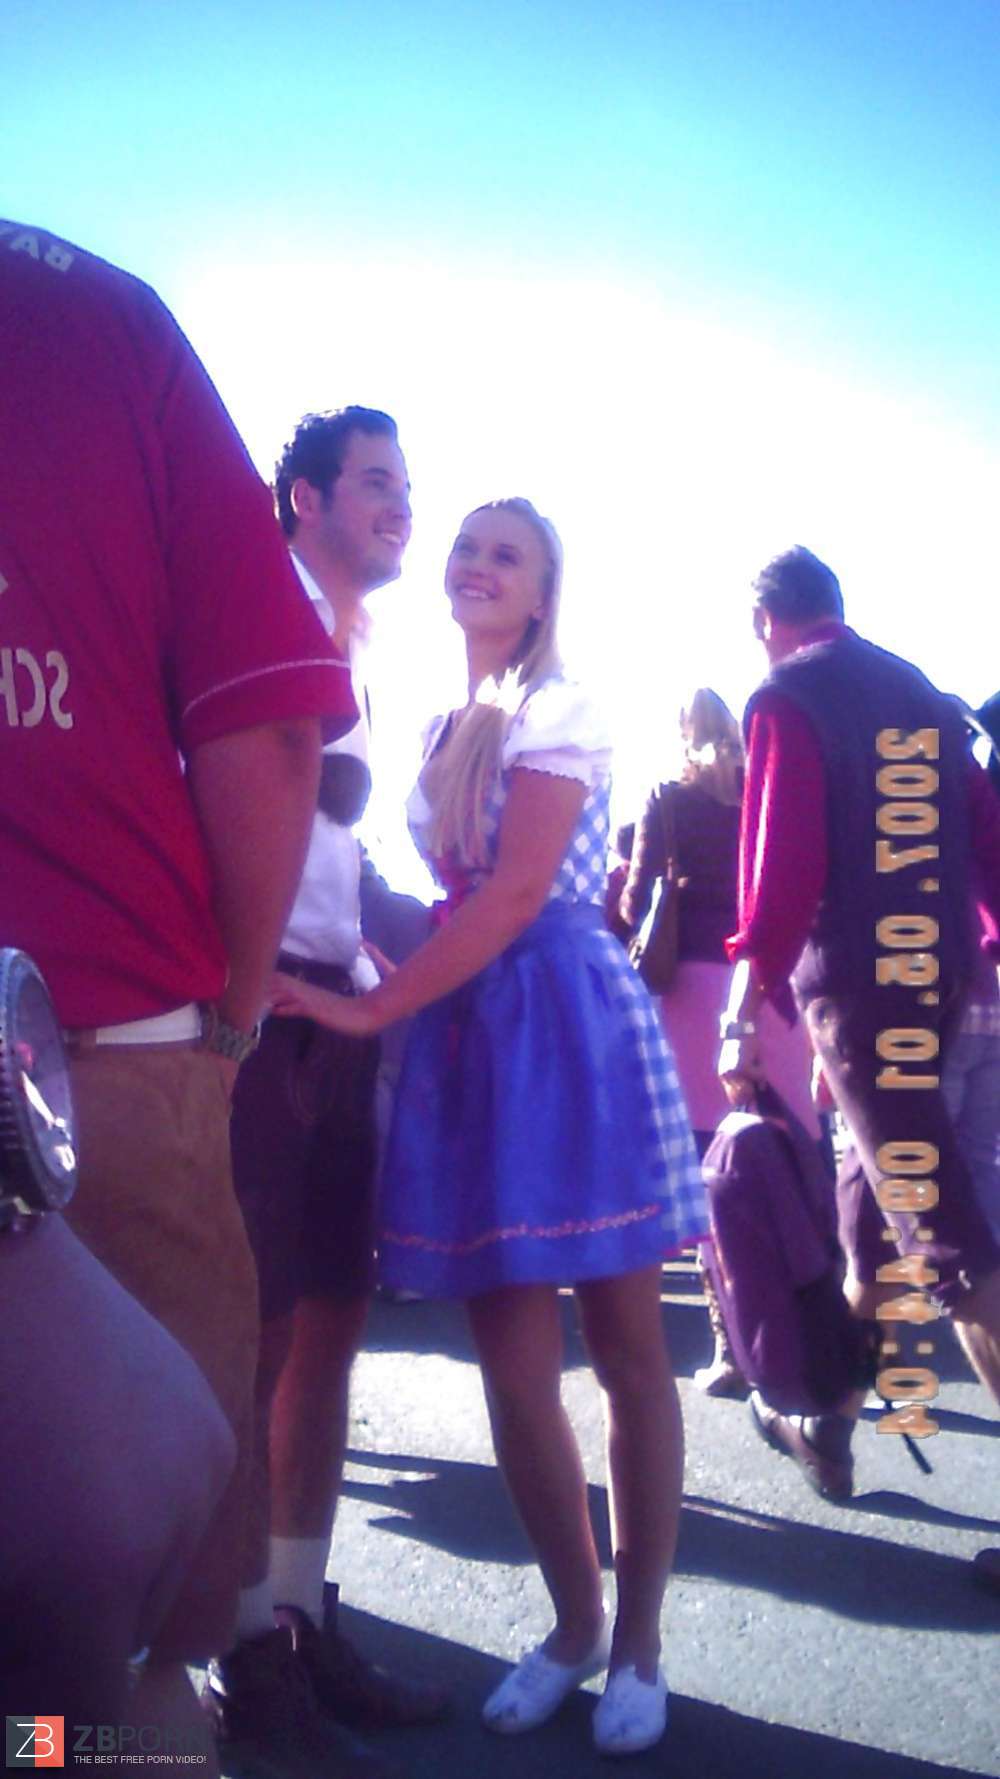 Octoberfest and upskirt and pics